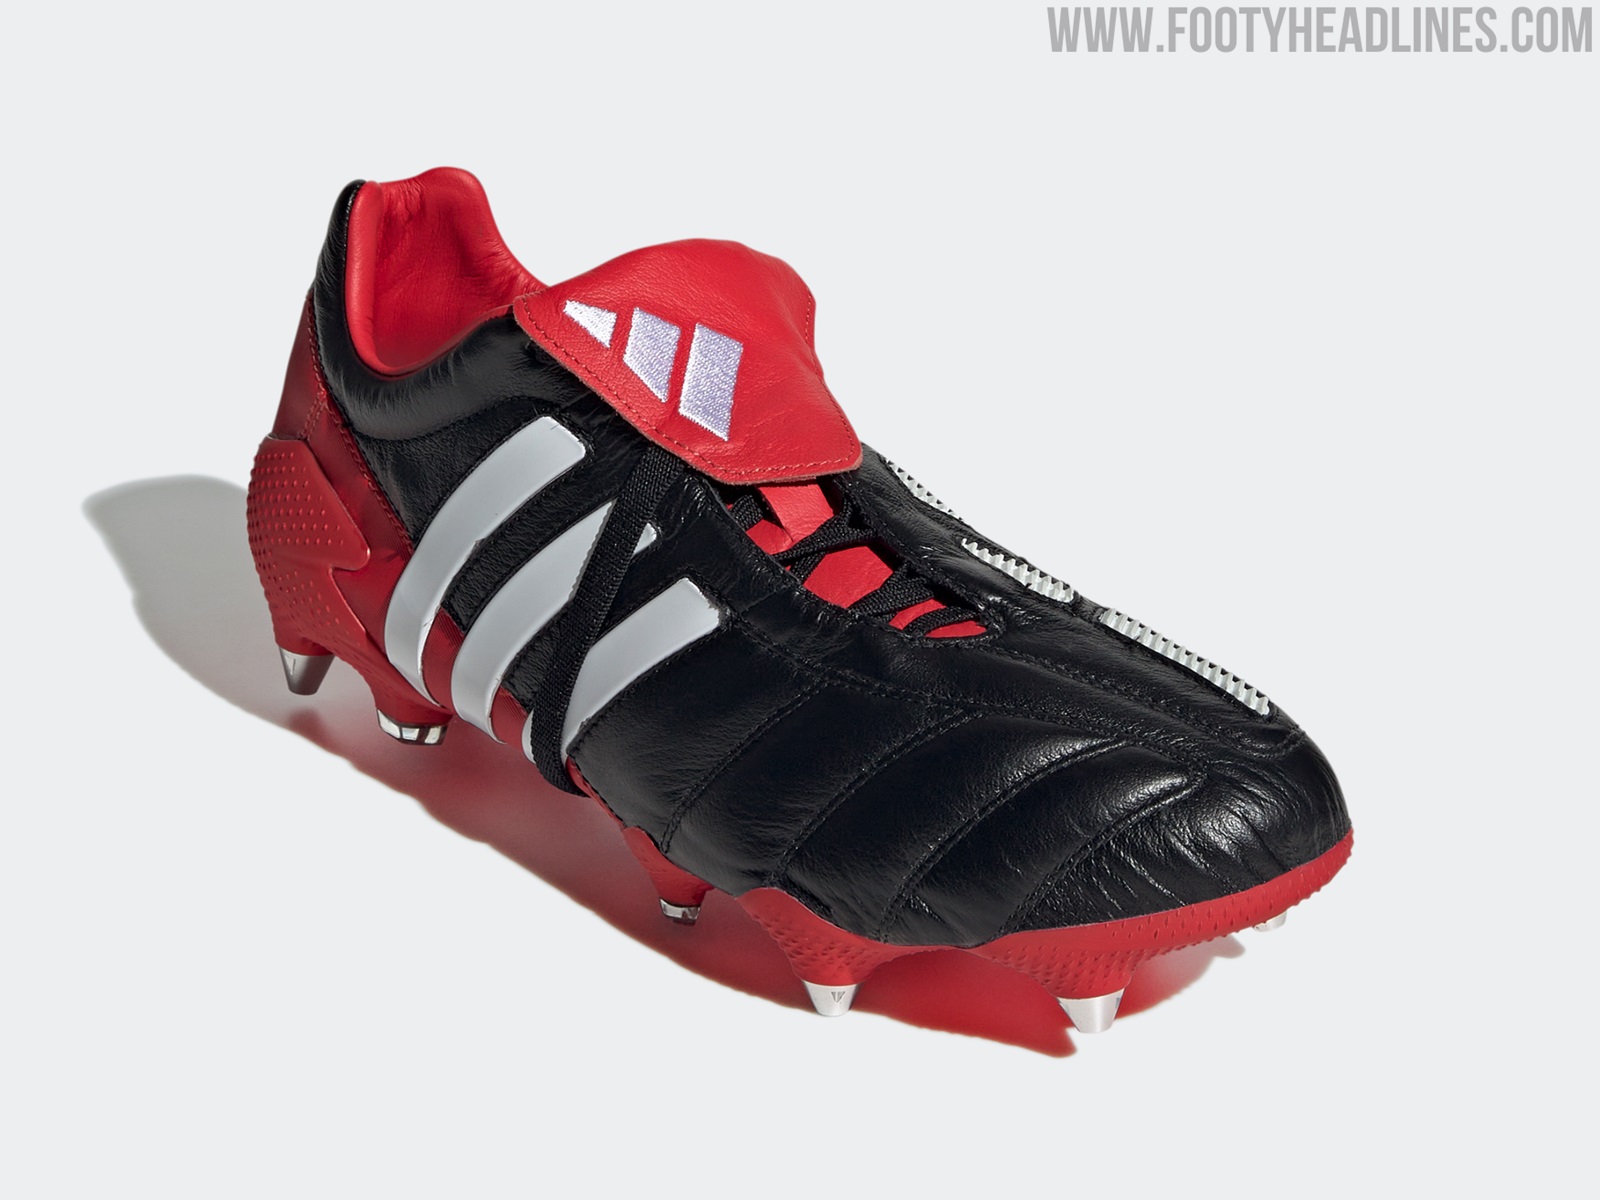 Adidas Predator Mania Project Completed – Boots Vault